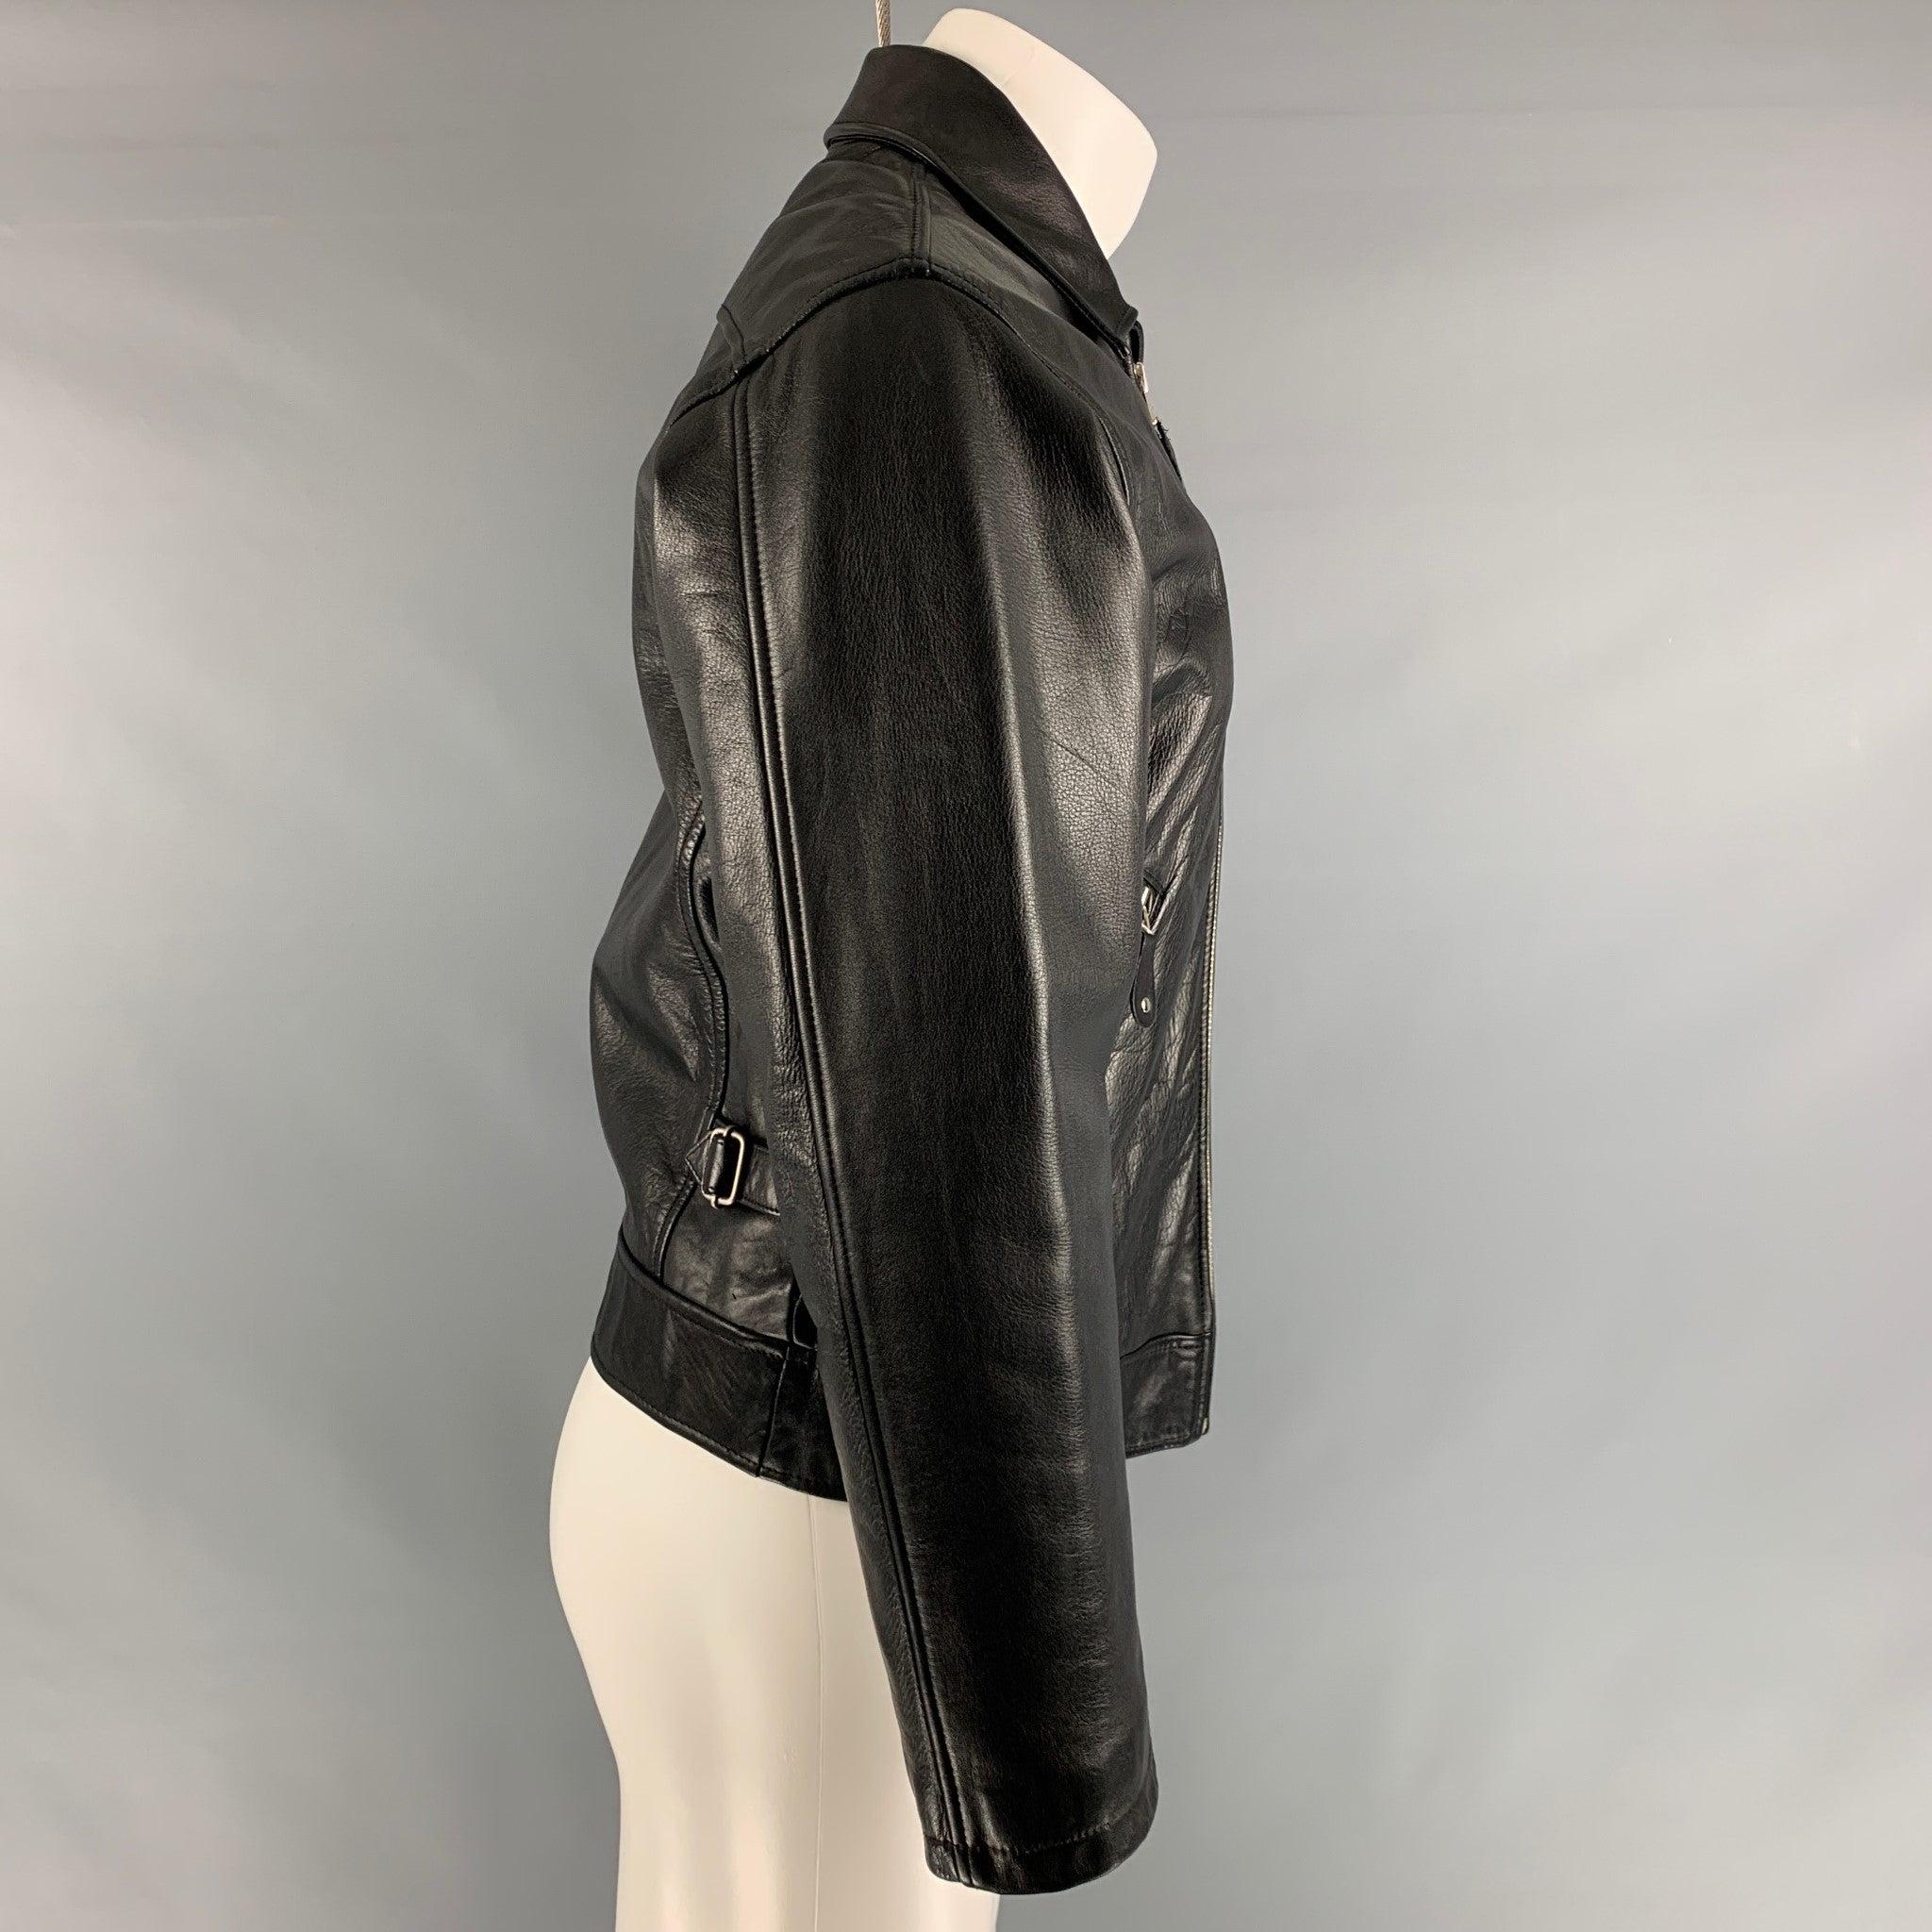 DONNA KARAN vintage jacket comes in black leather with a quilted lining, pointed collar, zip up front, and zipper pockets. Very Good Pre-Owned Condition. Minor signs of wear. 

Marked:   S 

Measurements: 
 
Shoulder: 19 inches Chest: 42 inches